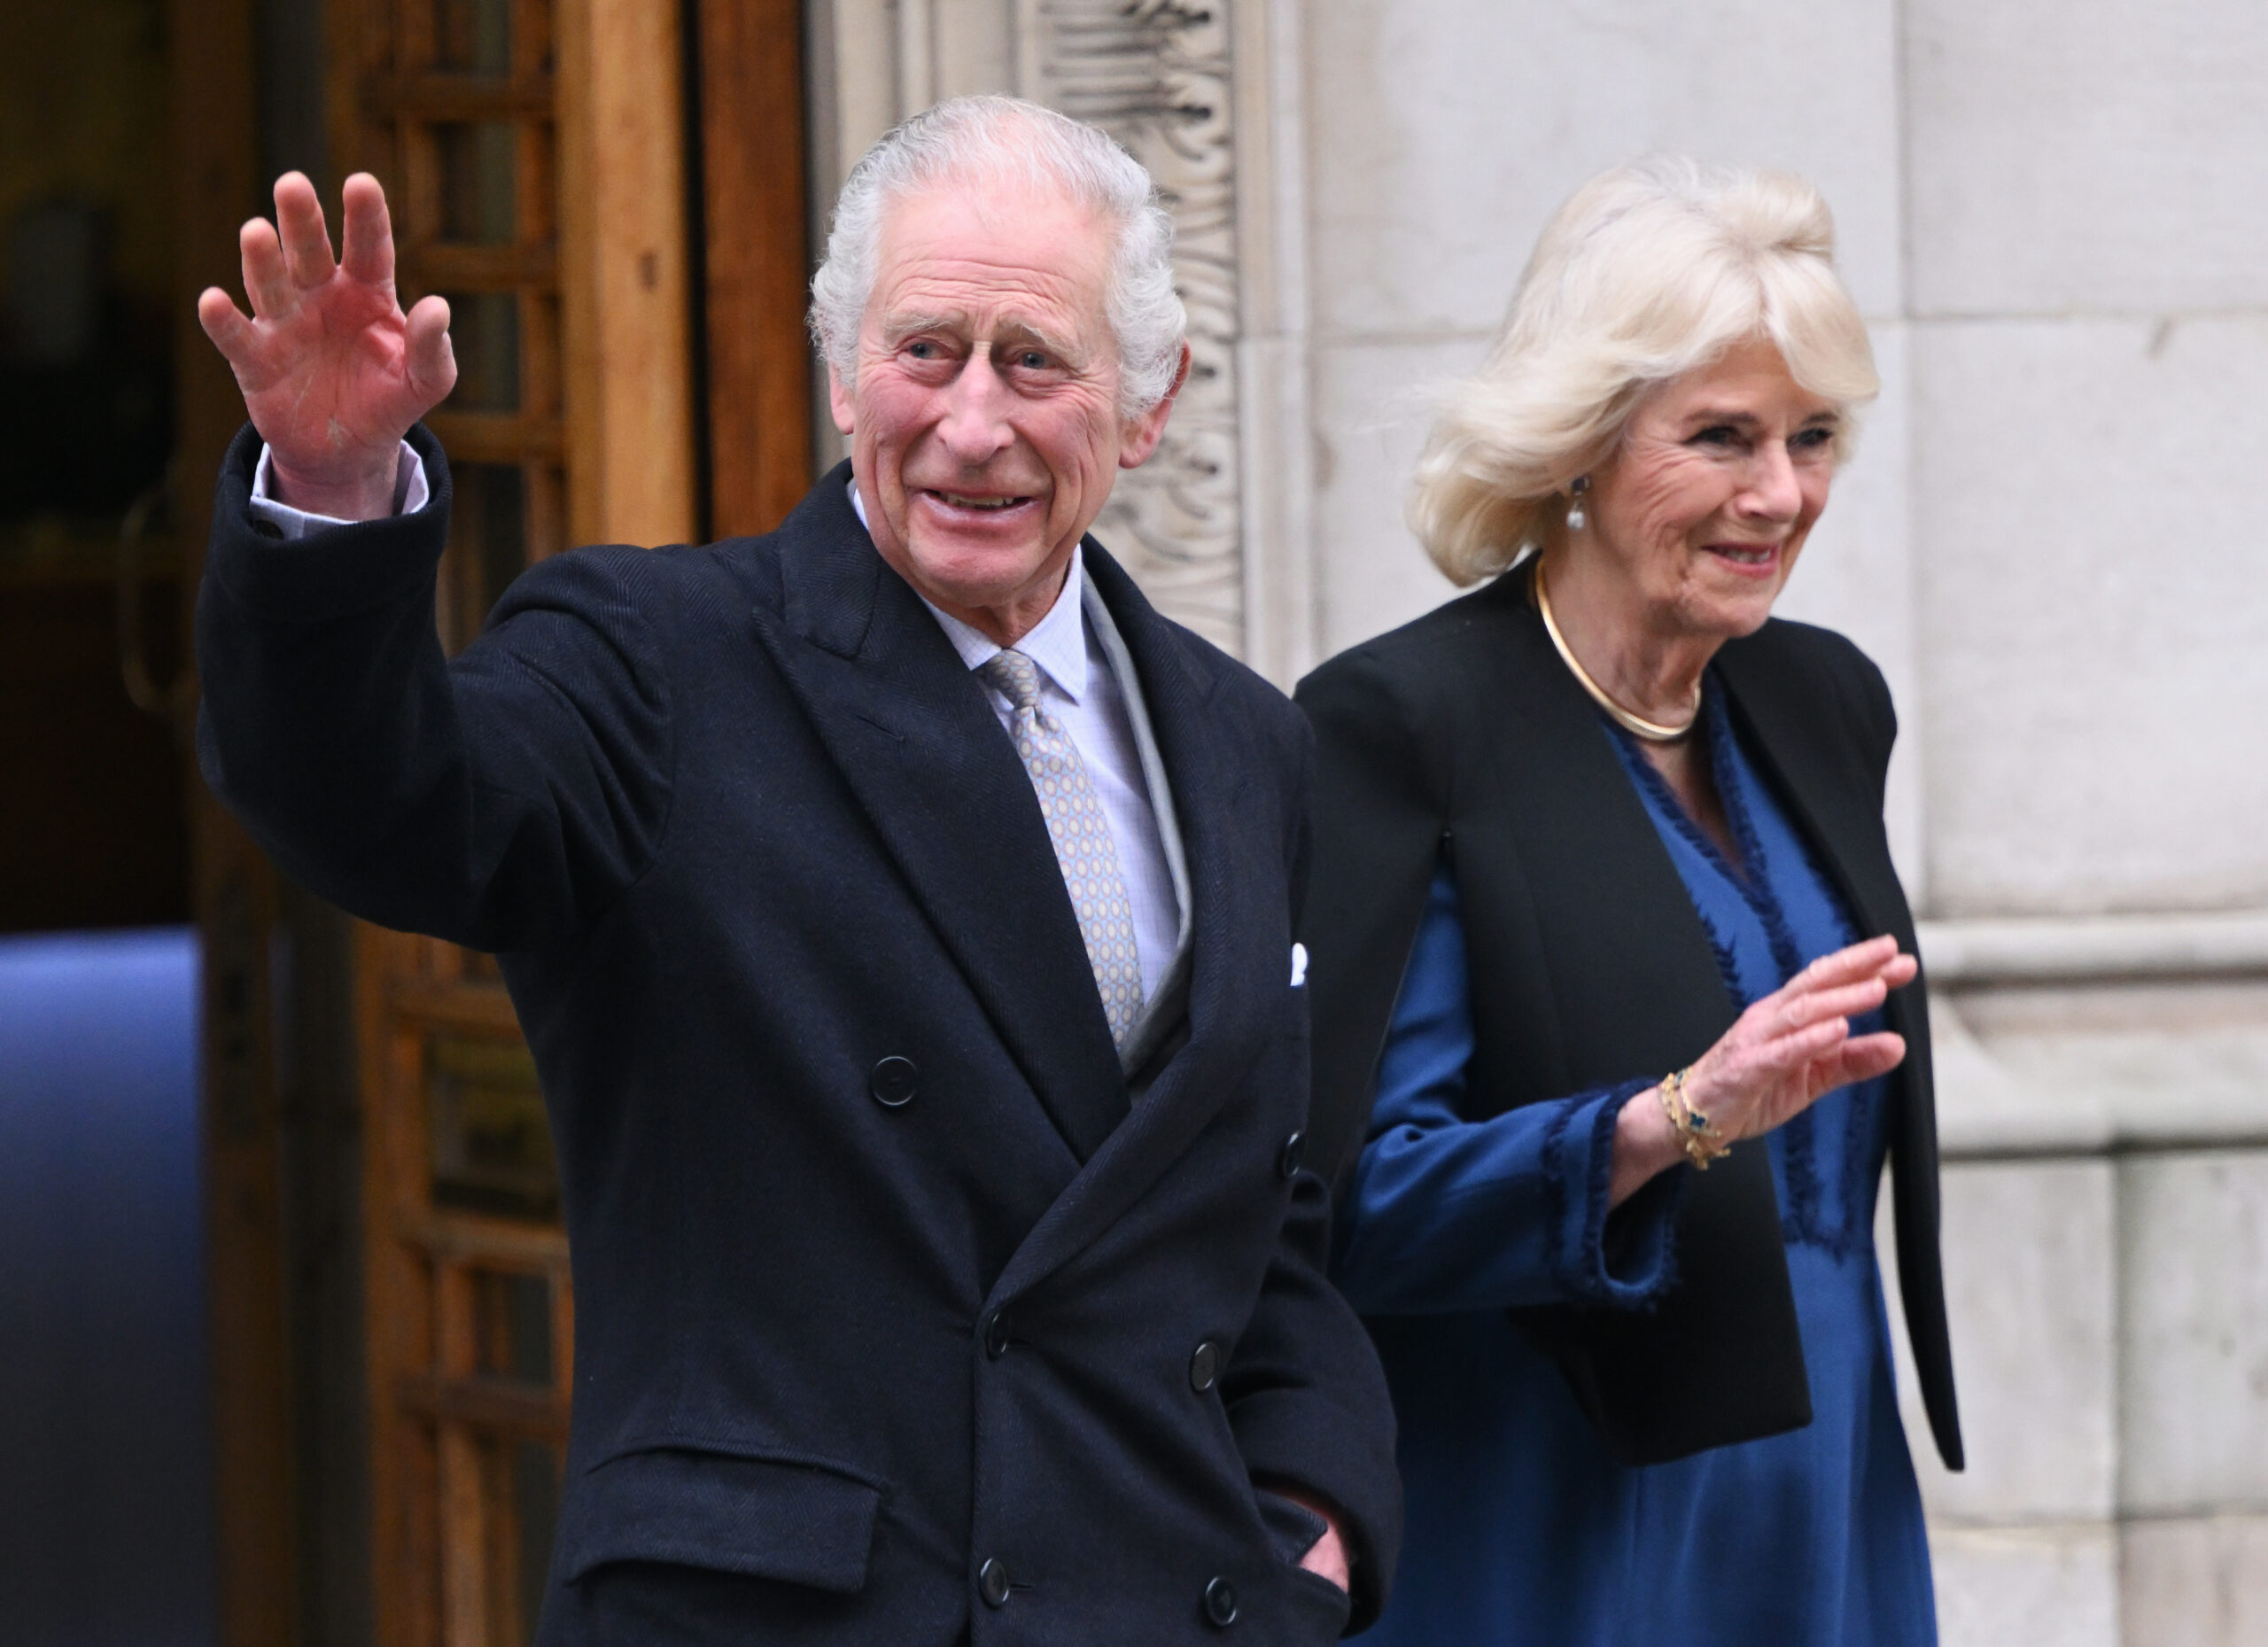 King Charles leaves hospital smiling after undergoing treatment for enlarged prostate